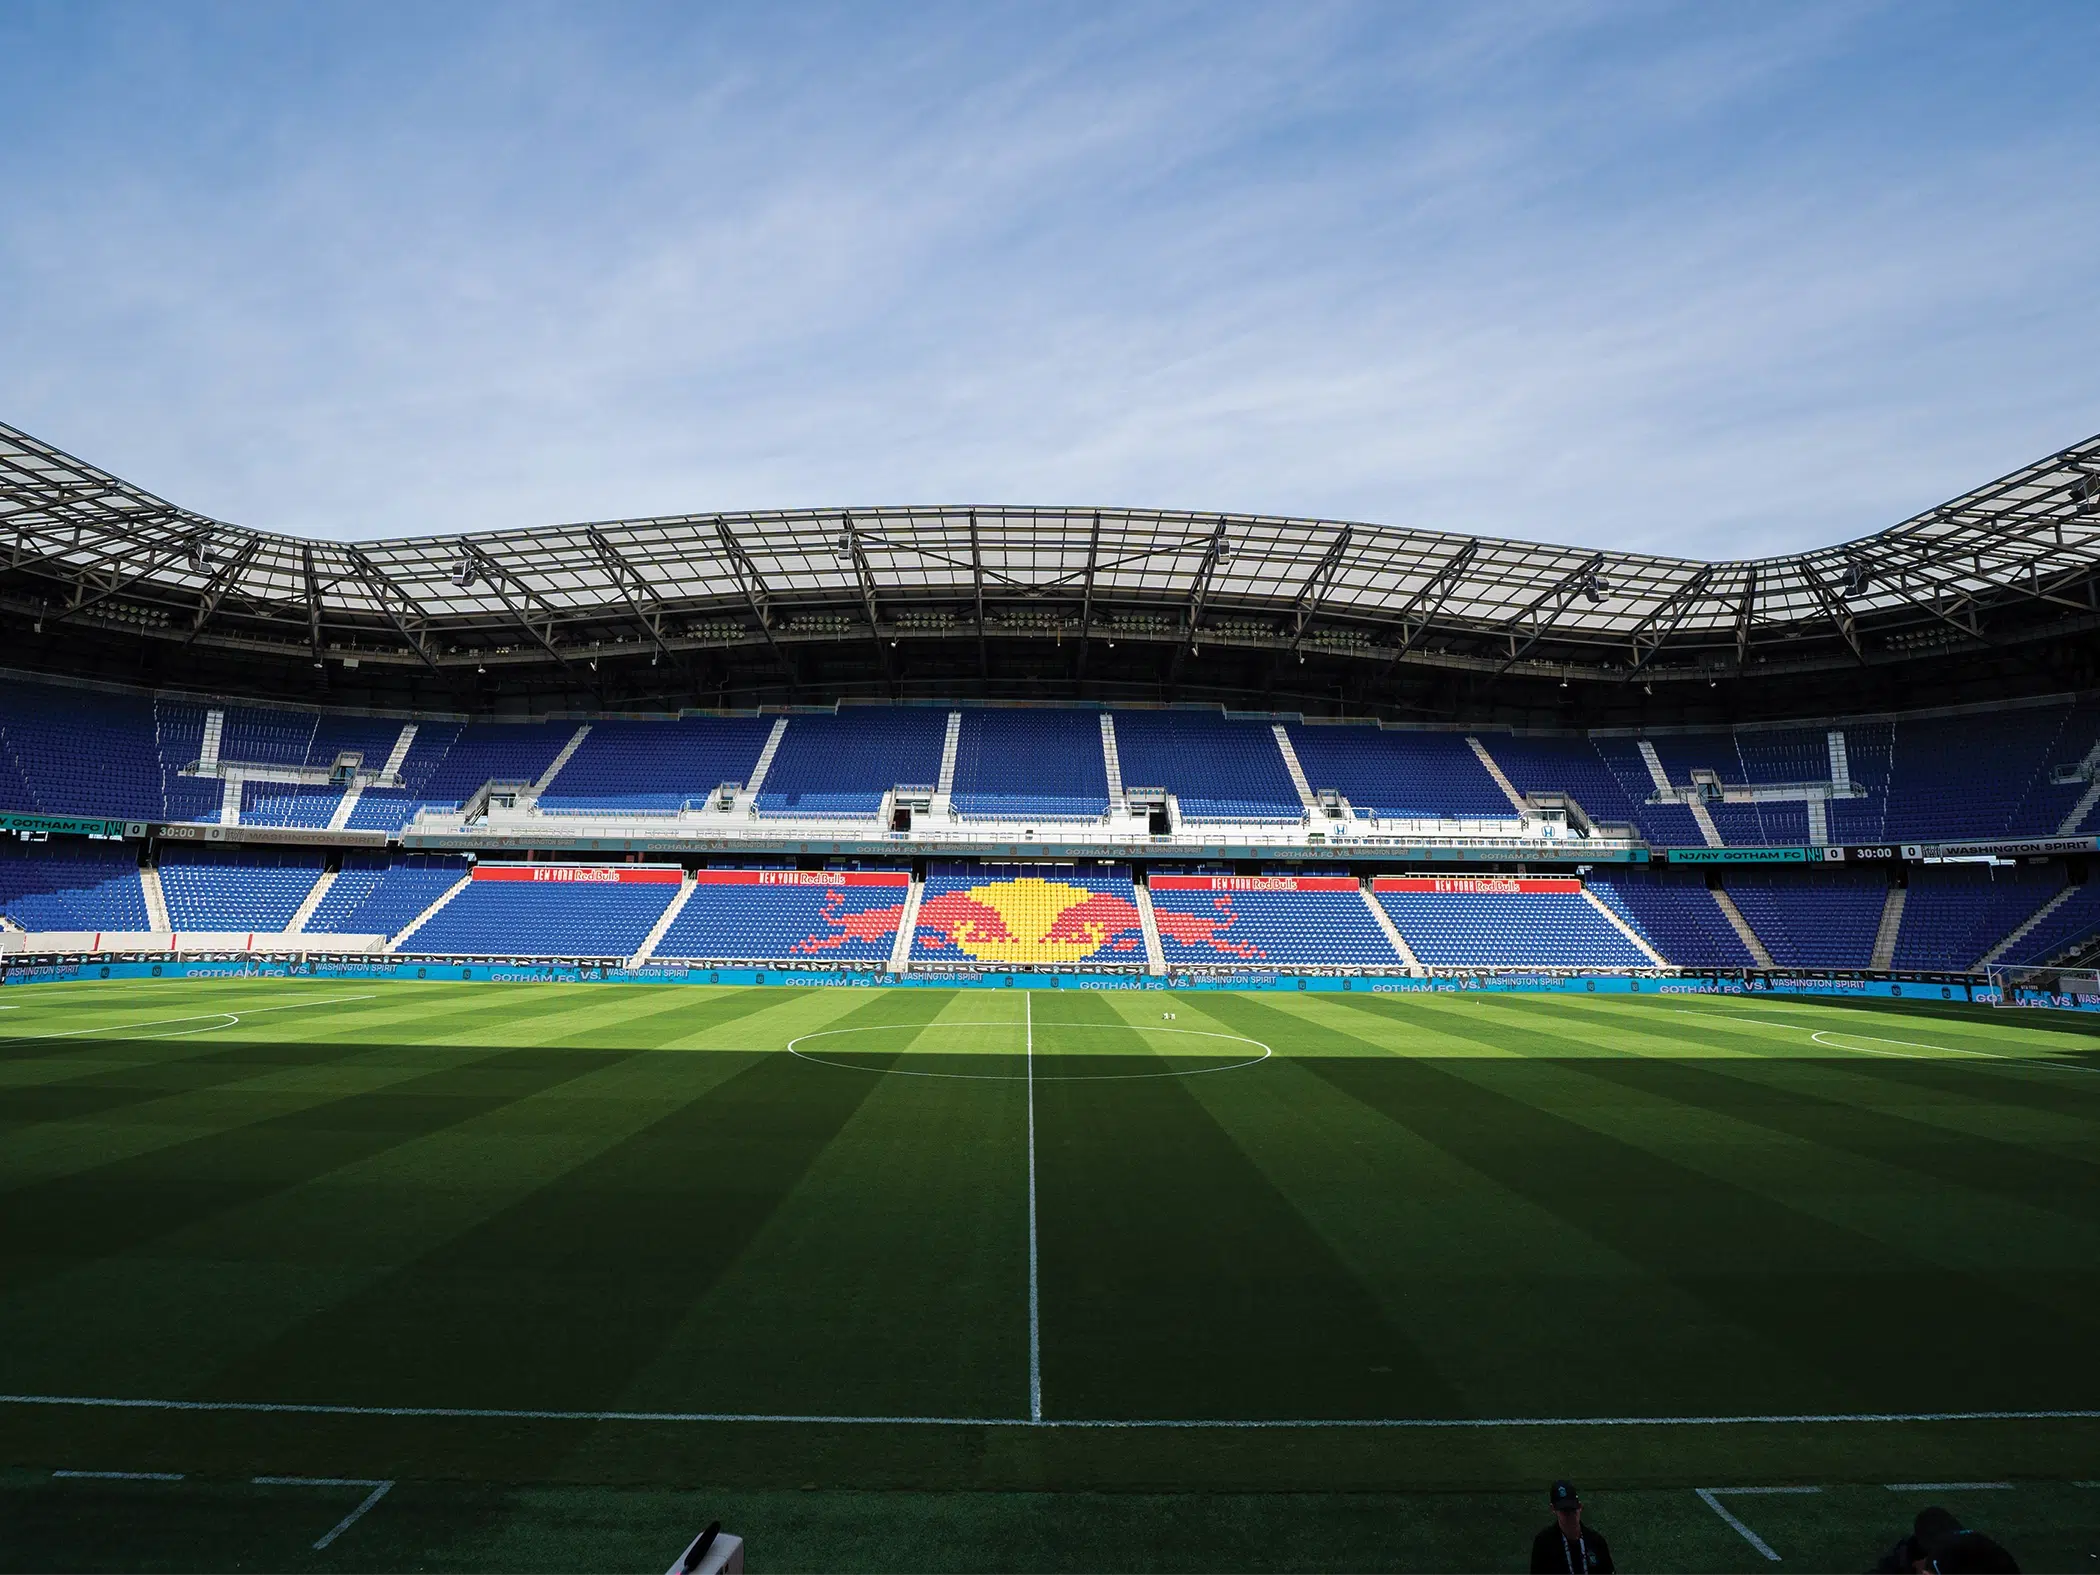 A shot of Red Bull Arena taken at midfield. The blue stands across the field have the Red Bull logo of two red bulls about to collide in front of a yellow sun.